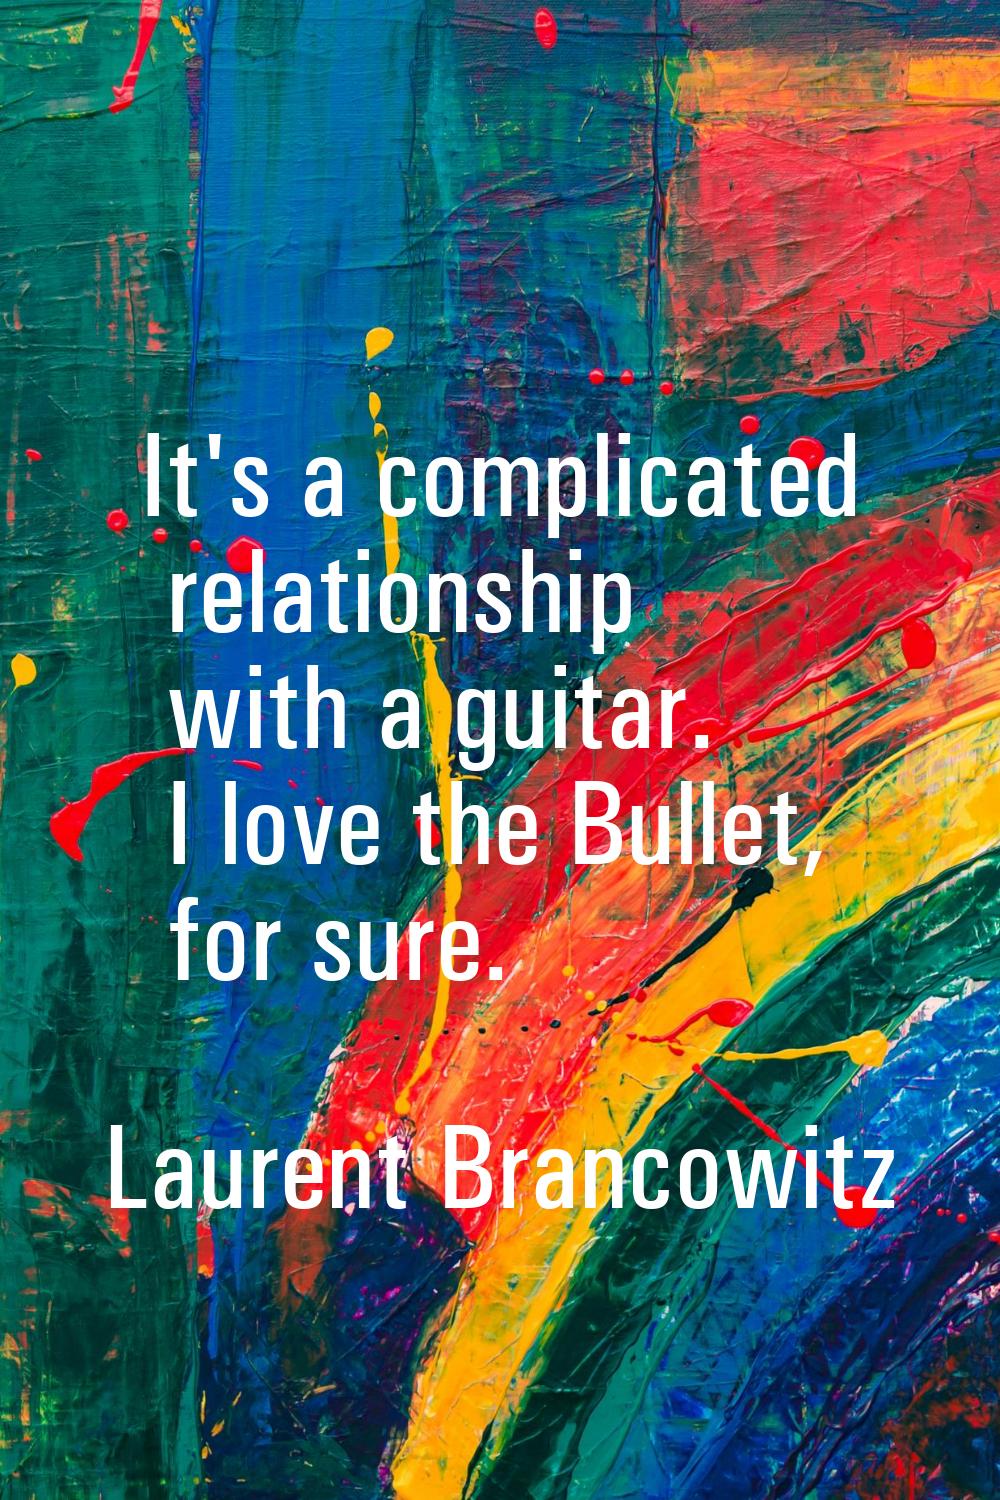 It's a complicated relationship with a guitar. I love the Bullet, for sure.